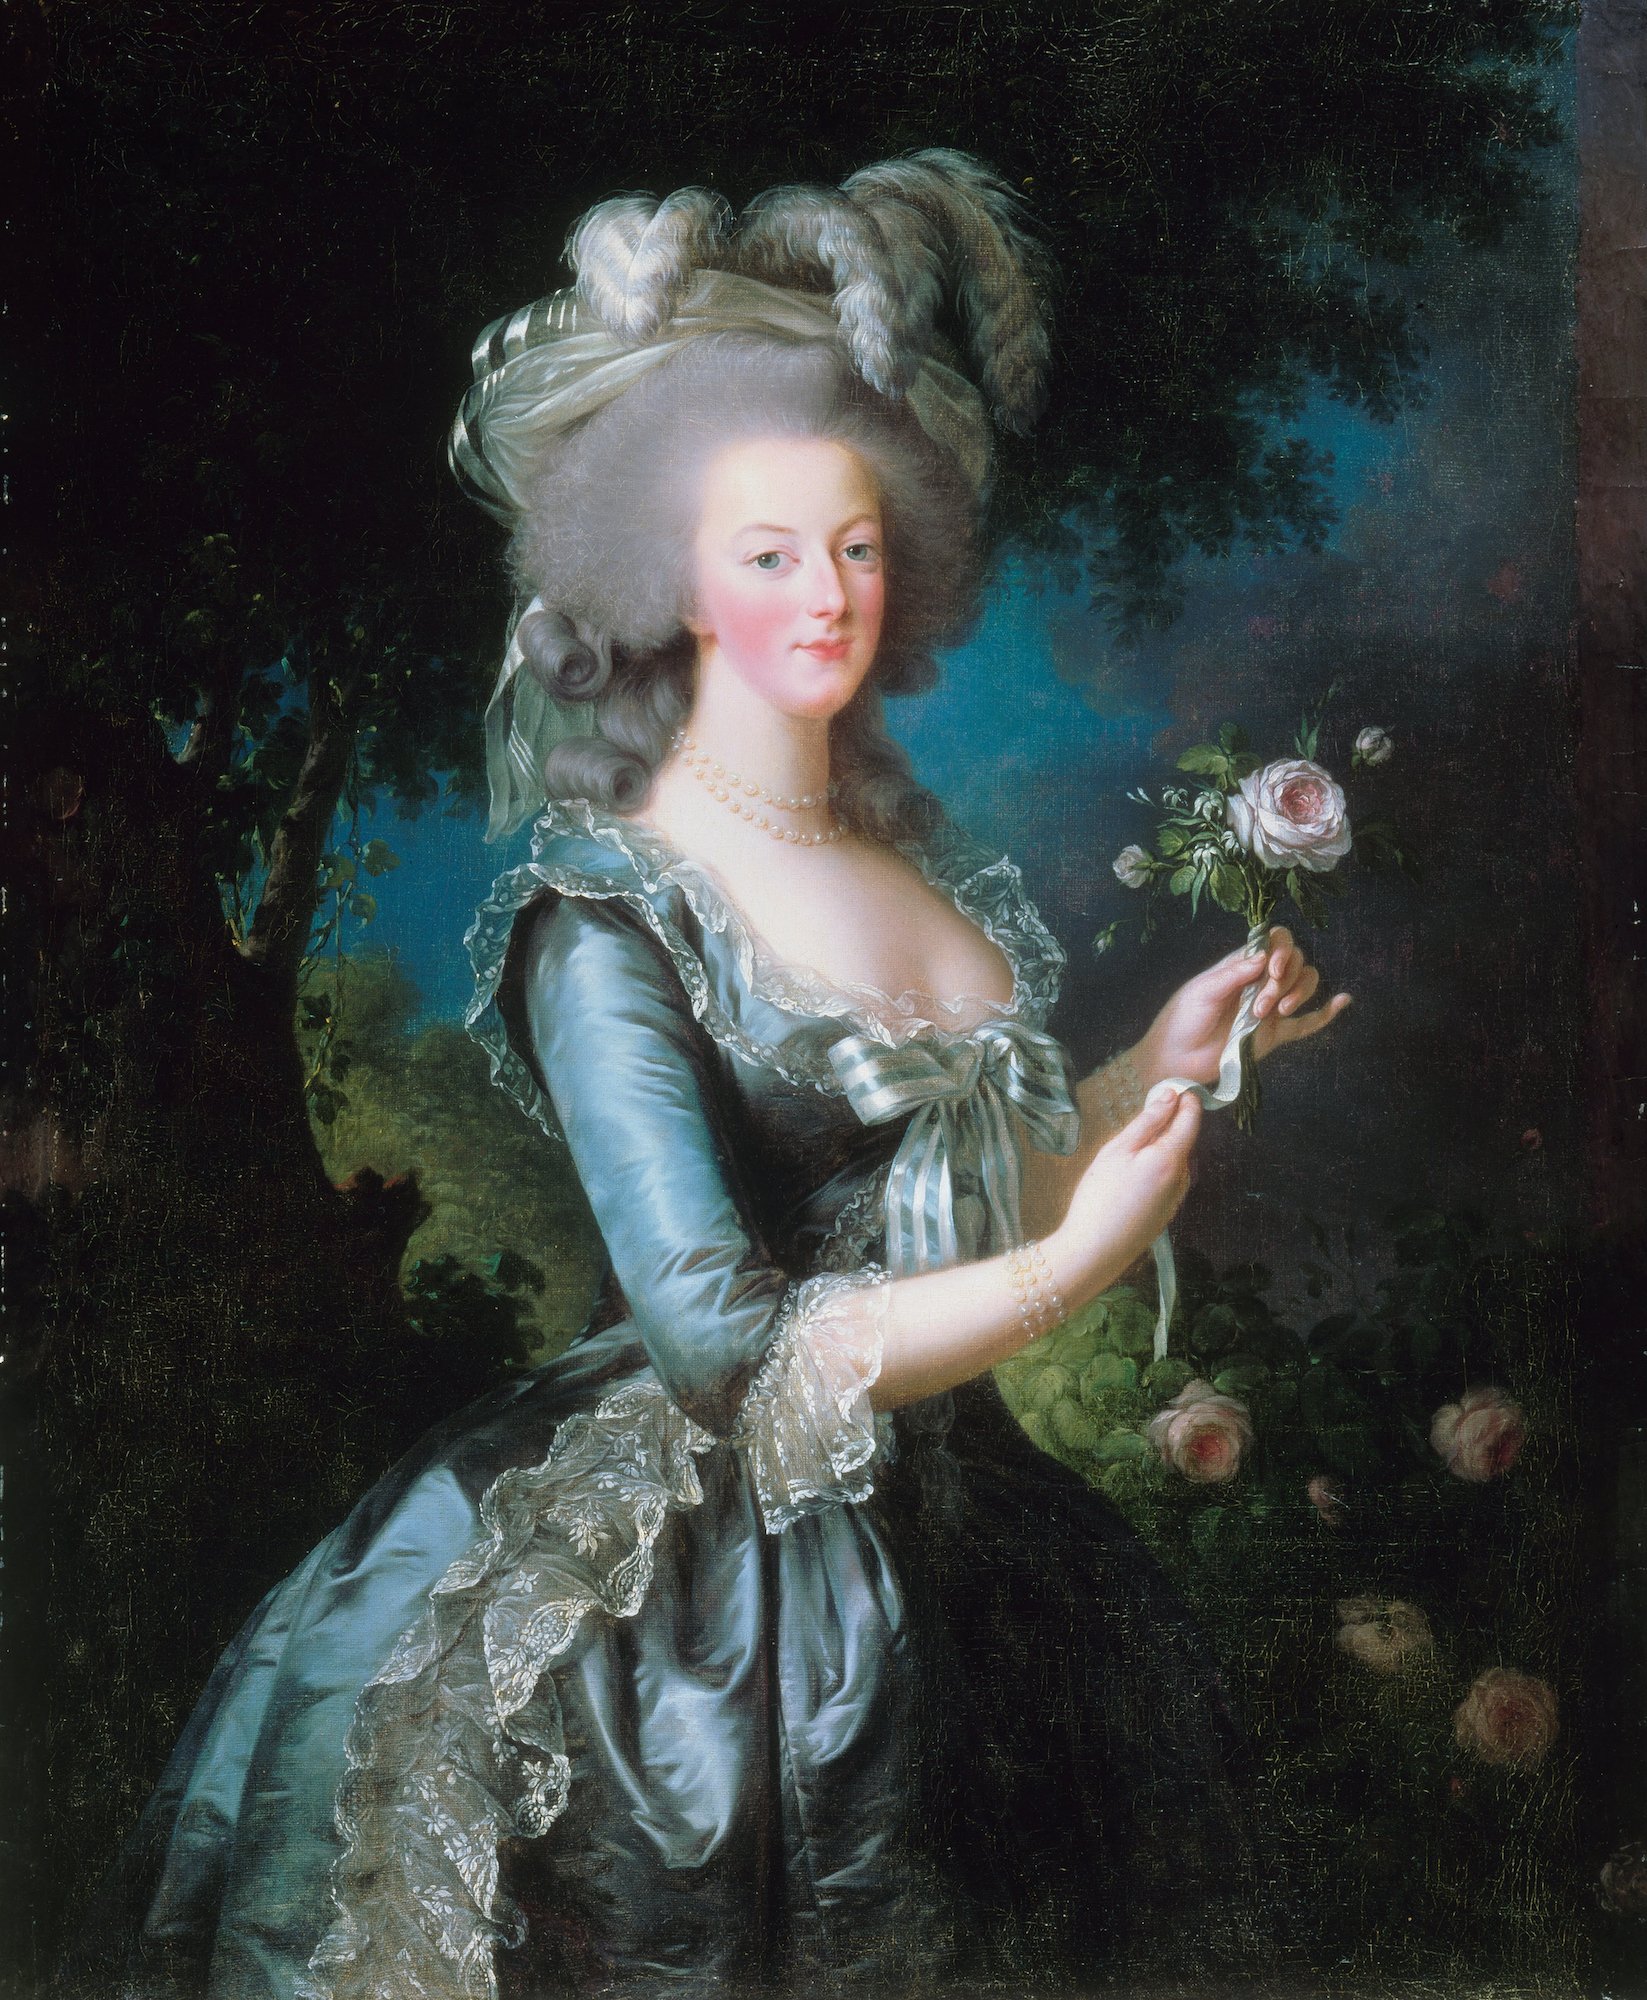 Élisabeth Vigée Le Bruns Portraits of Marie Antoinette Sparked Scandal—Here Are 3 Things You Might Not Know About the Royal Image